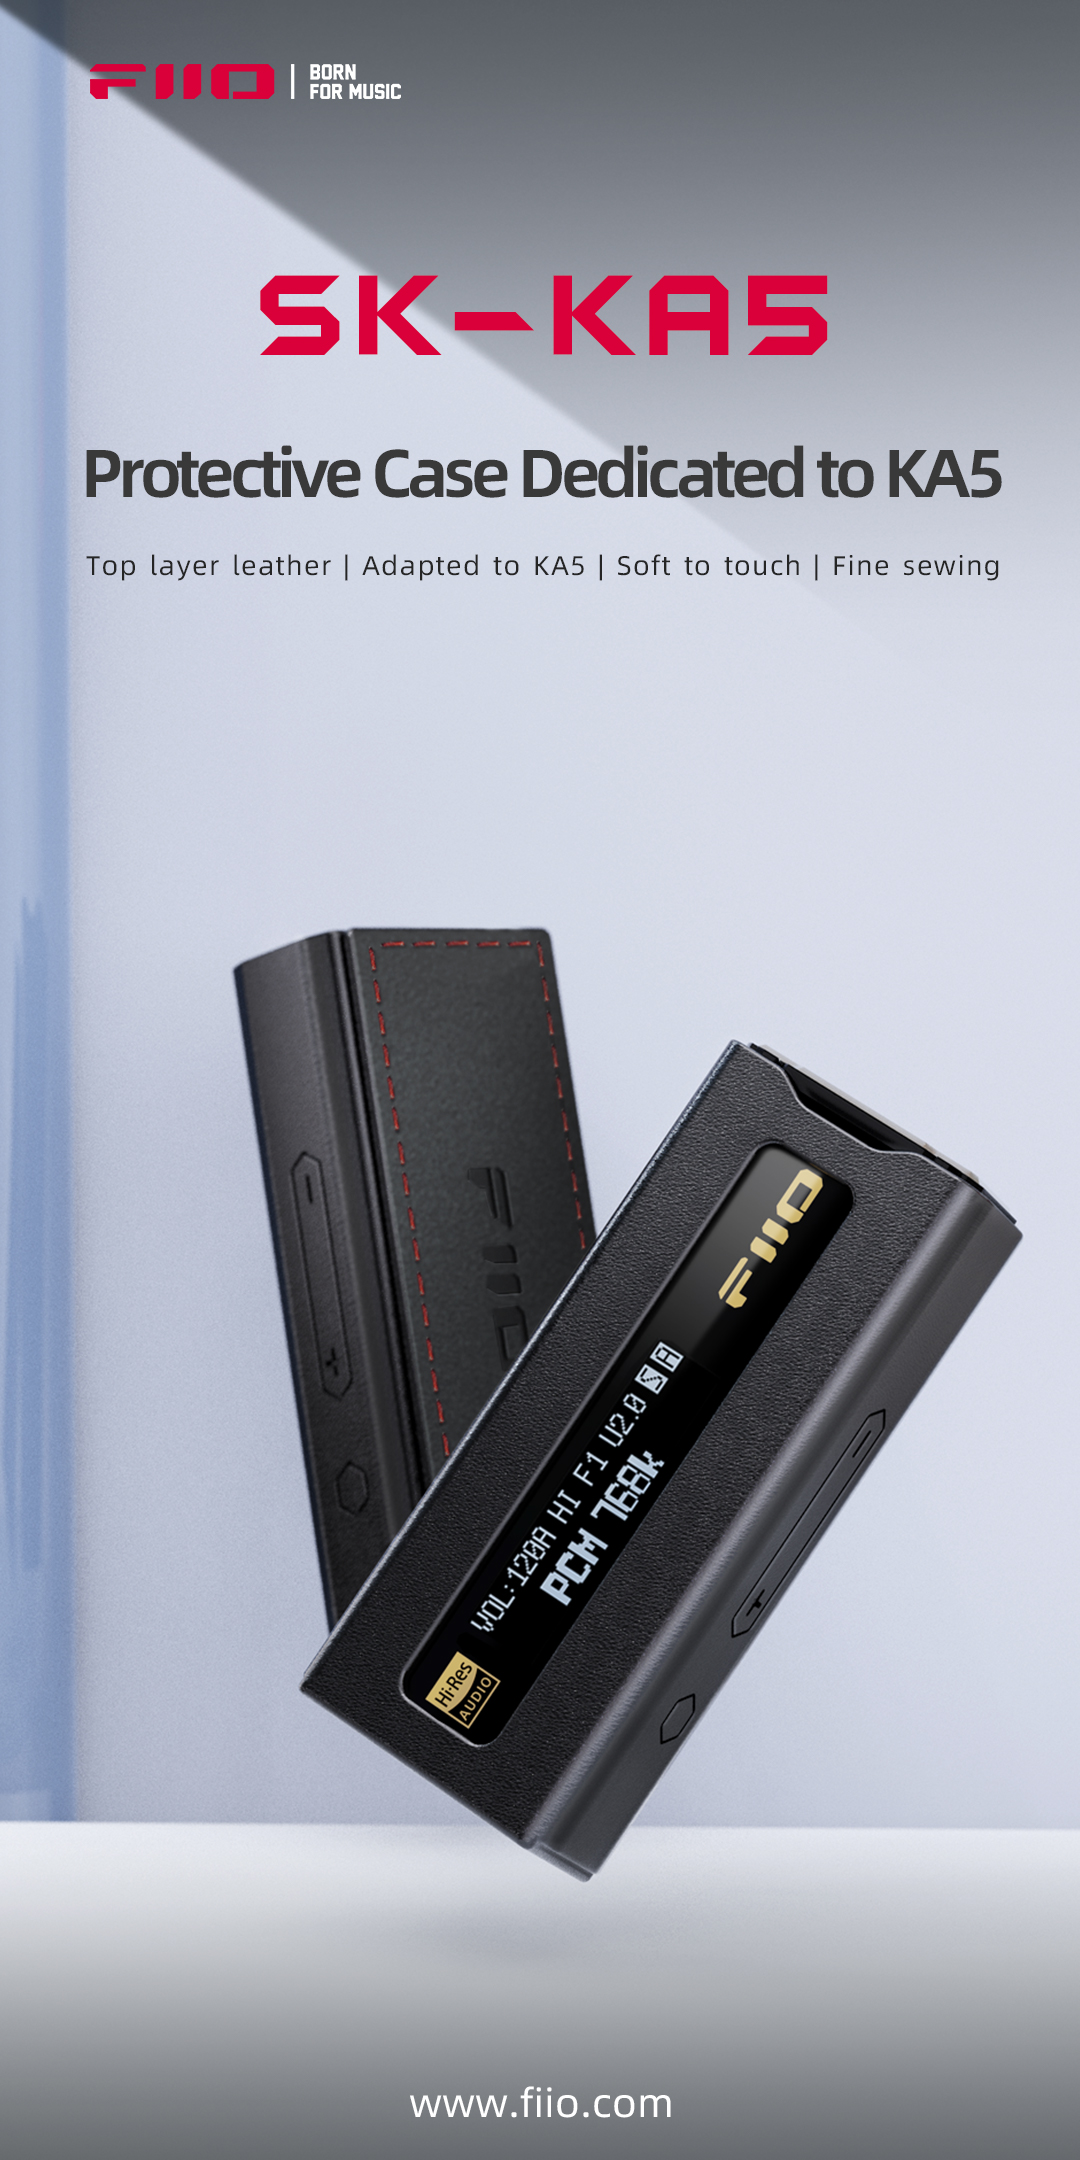 Protective Case Dedicated to KA5 Is Officially Released!-FIIO